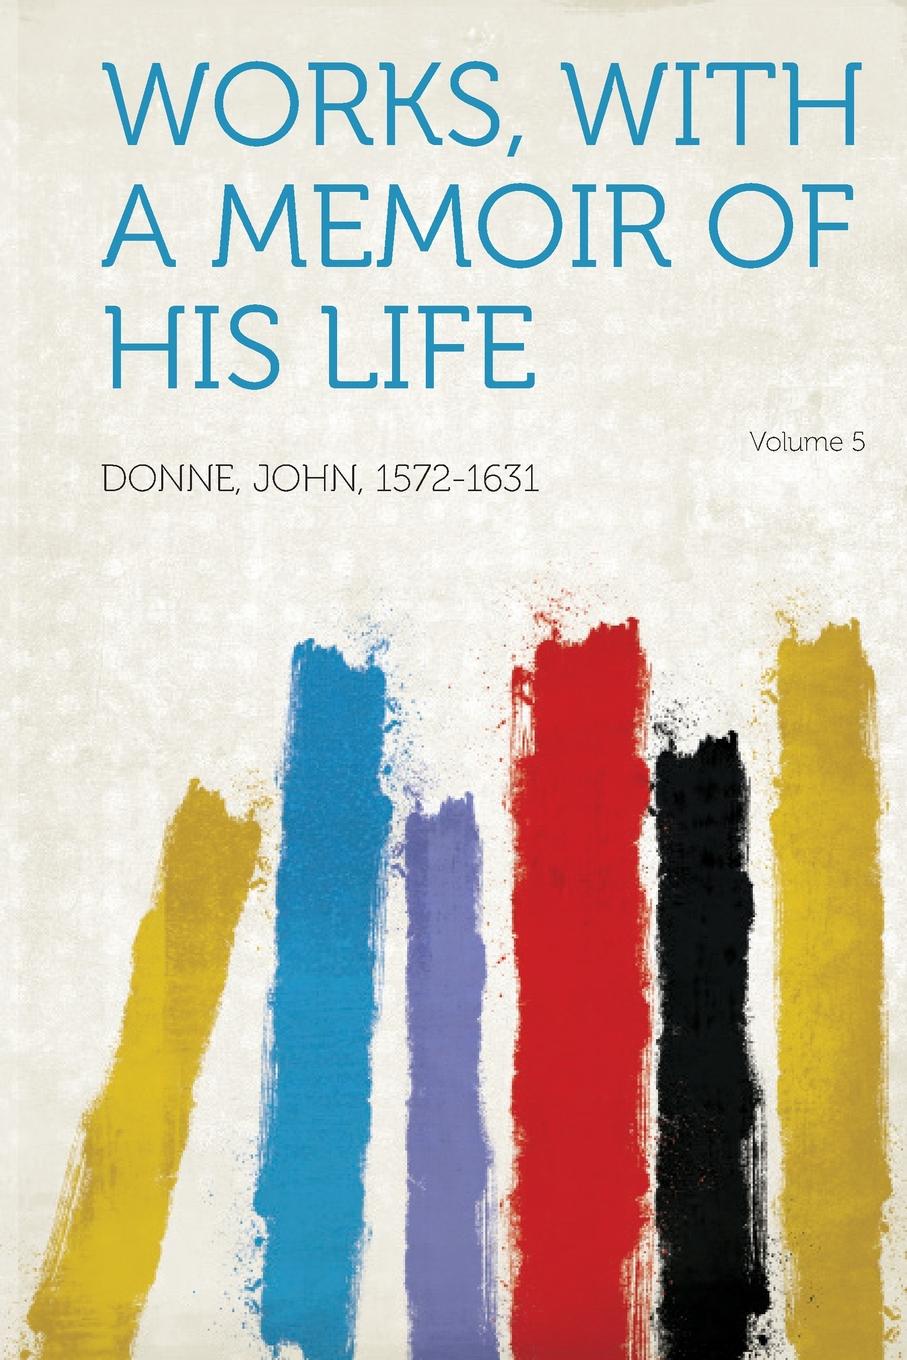 Works, with a Memoir of His Life Volume 5